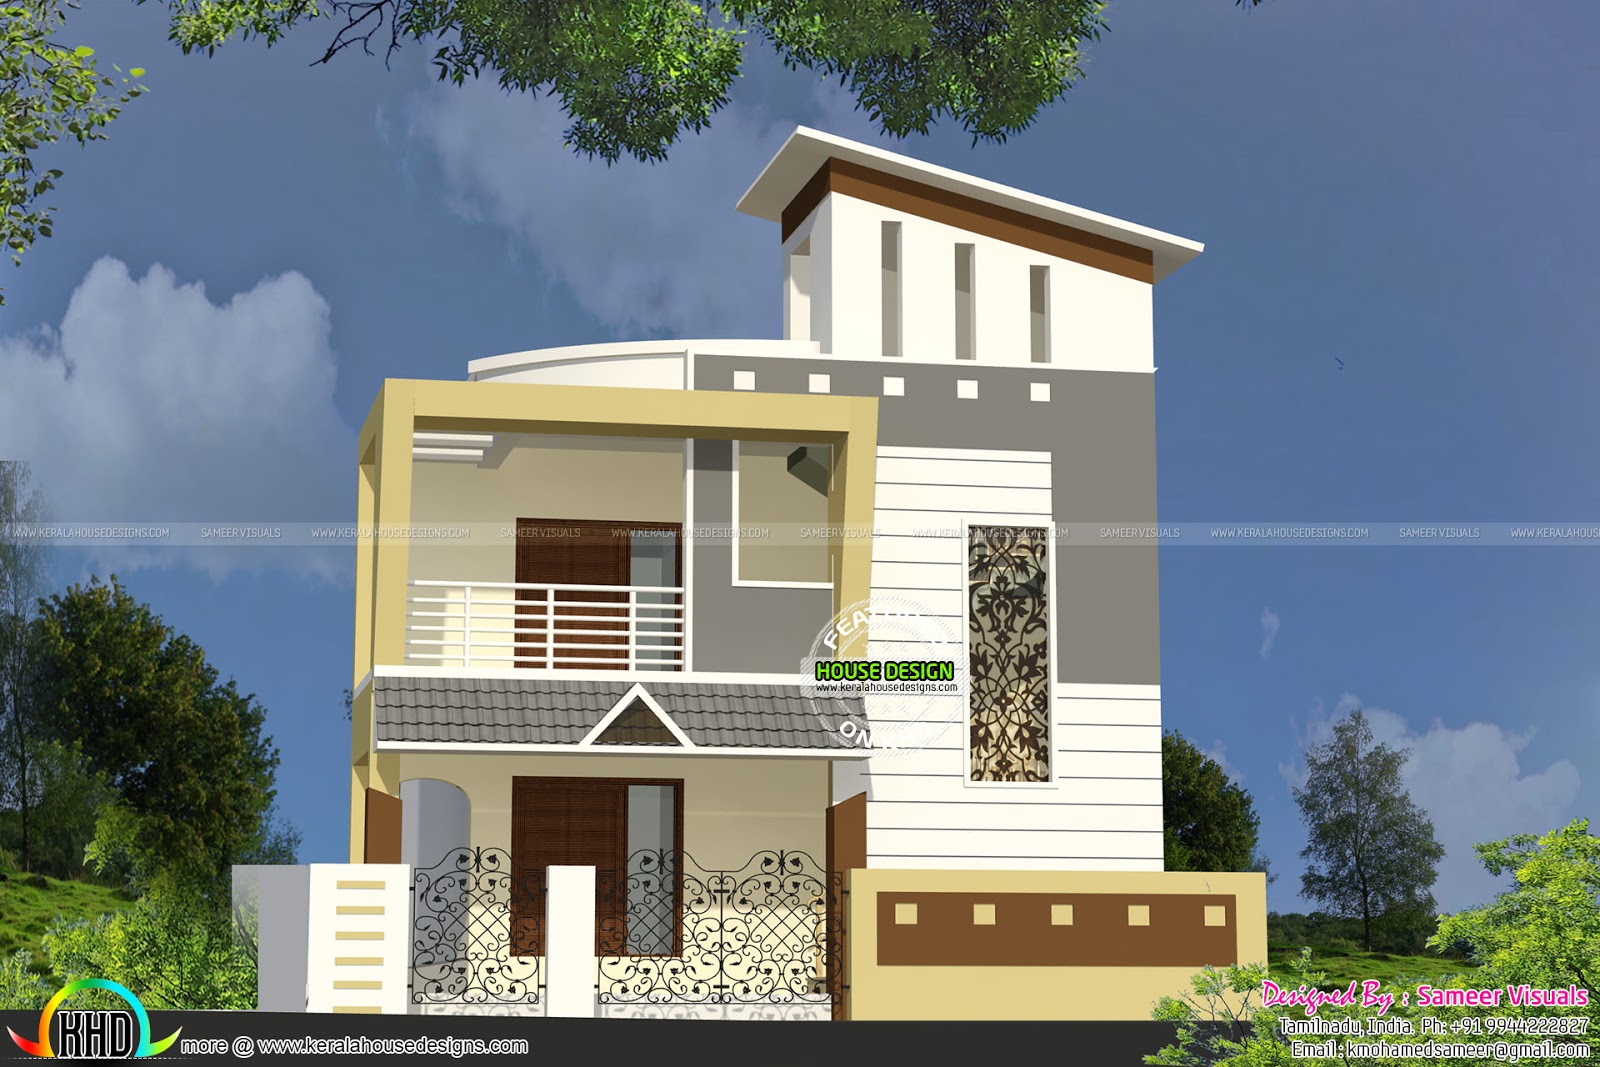  Double  floor  small home  Kerala home  design  and floor  plans 